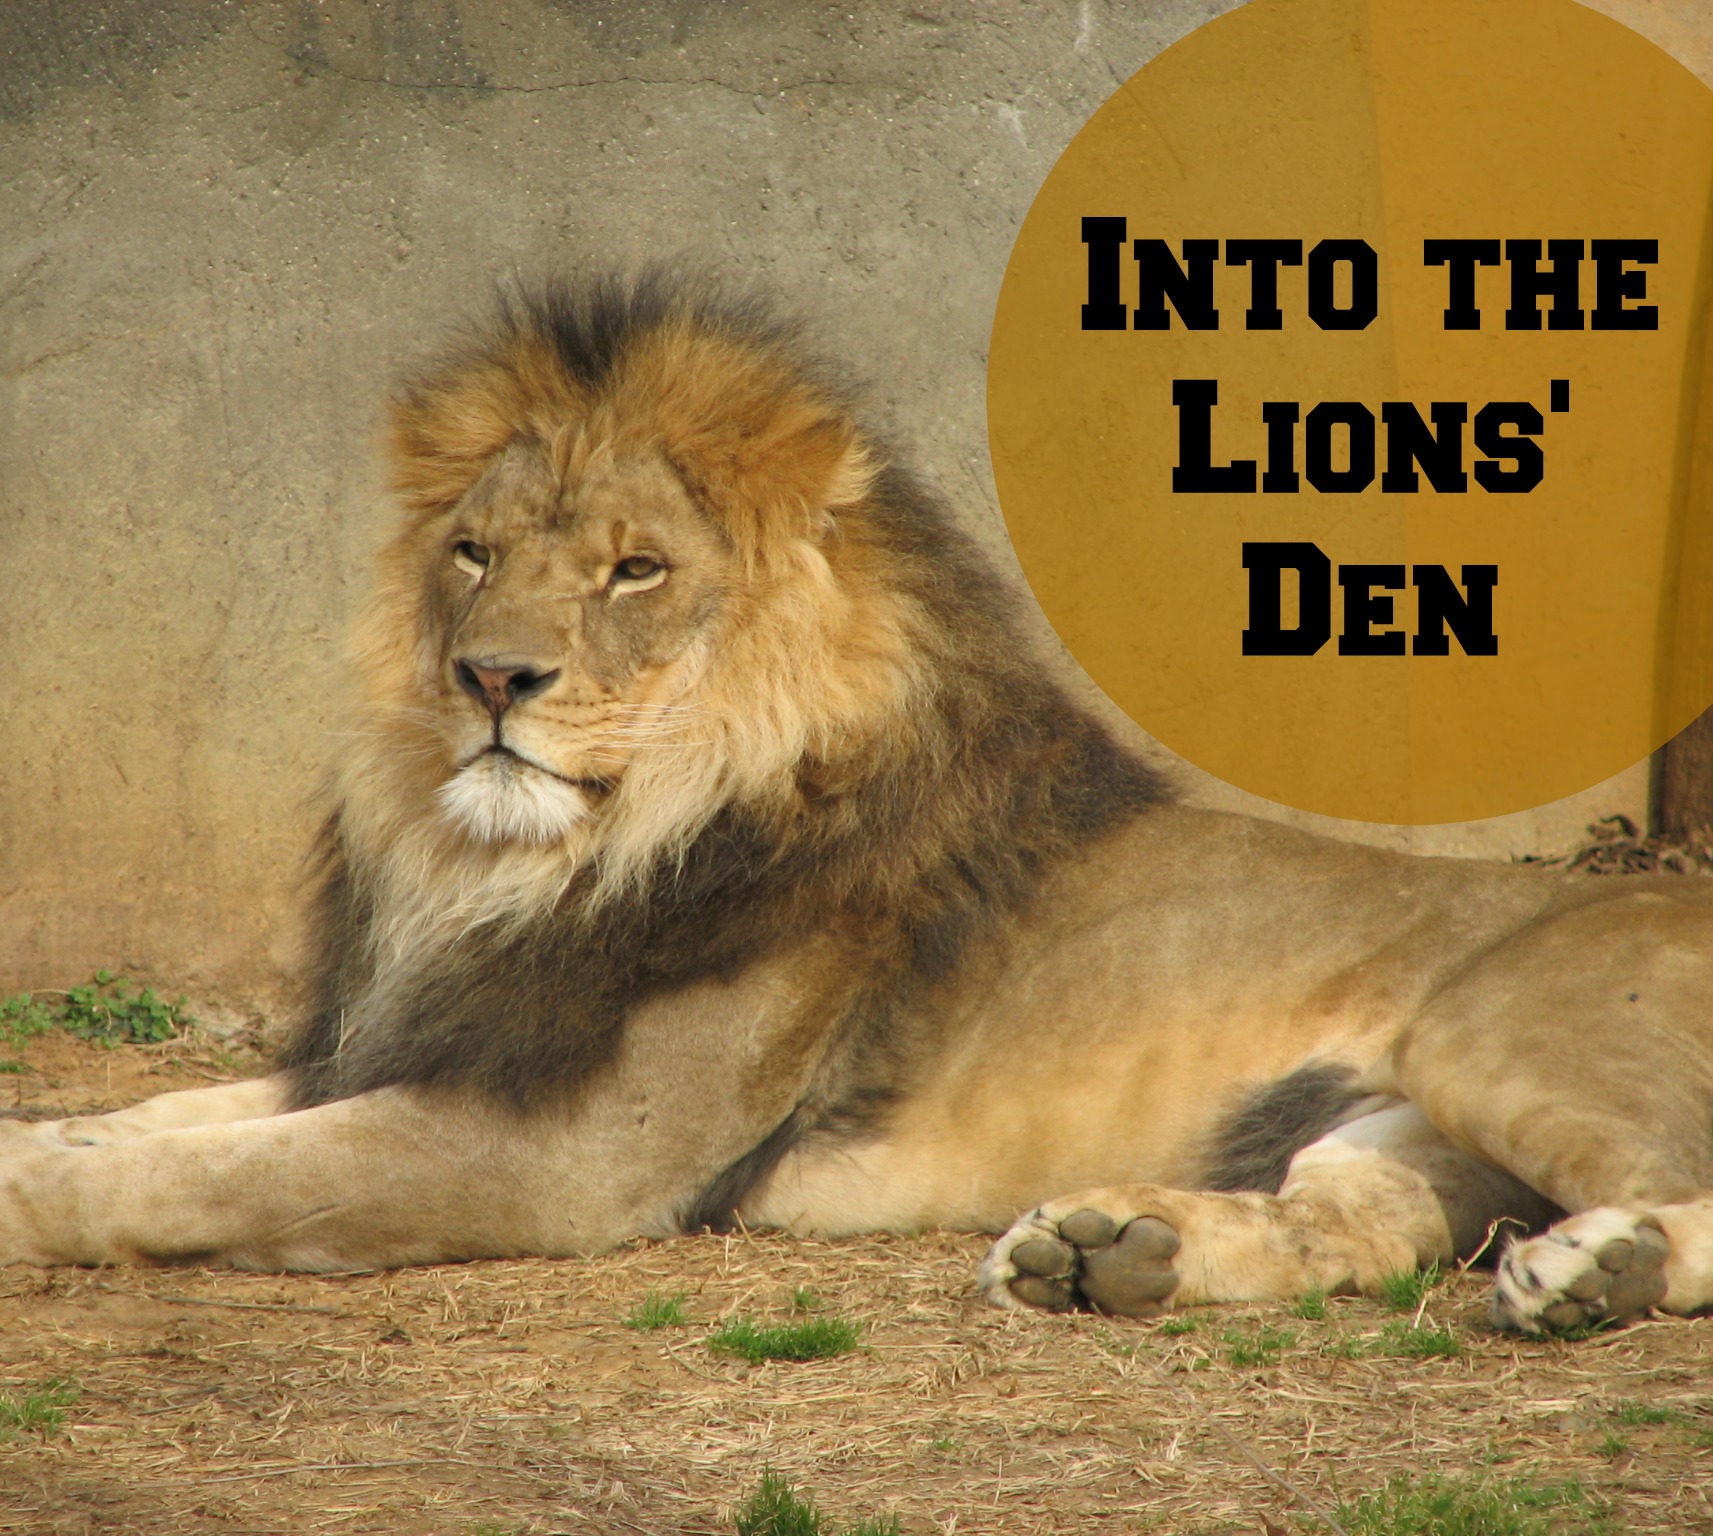 Into the Lions’ Den – What We Can Learn From Daniel